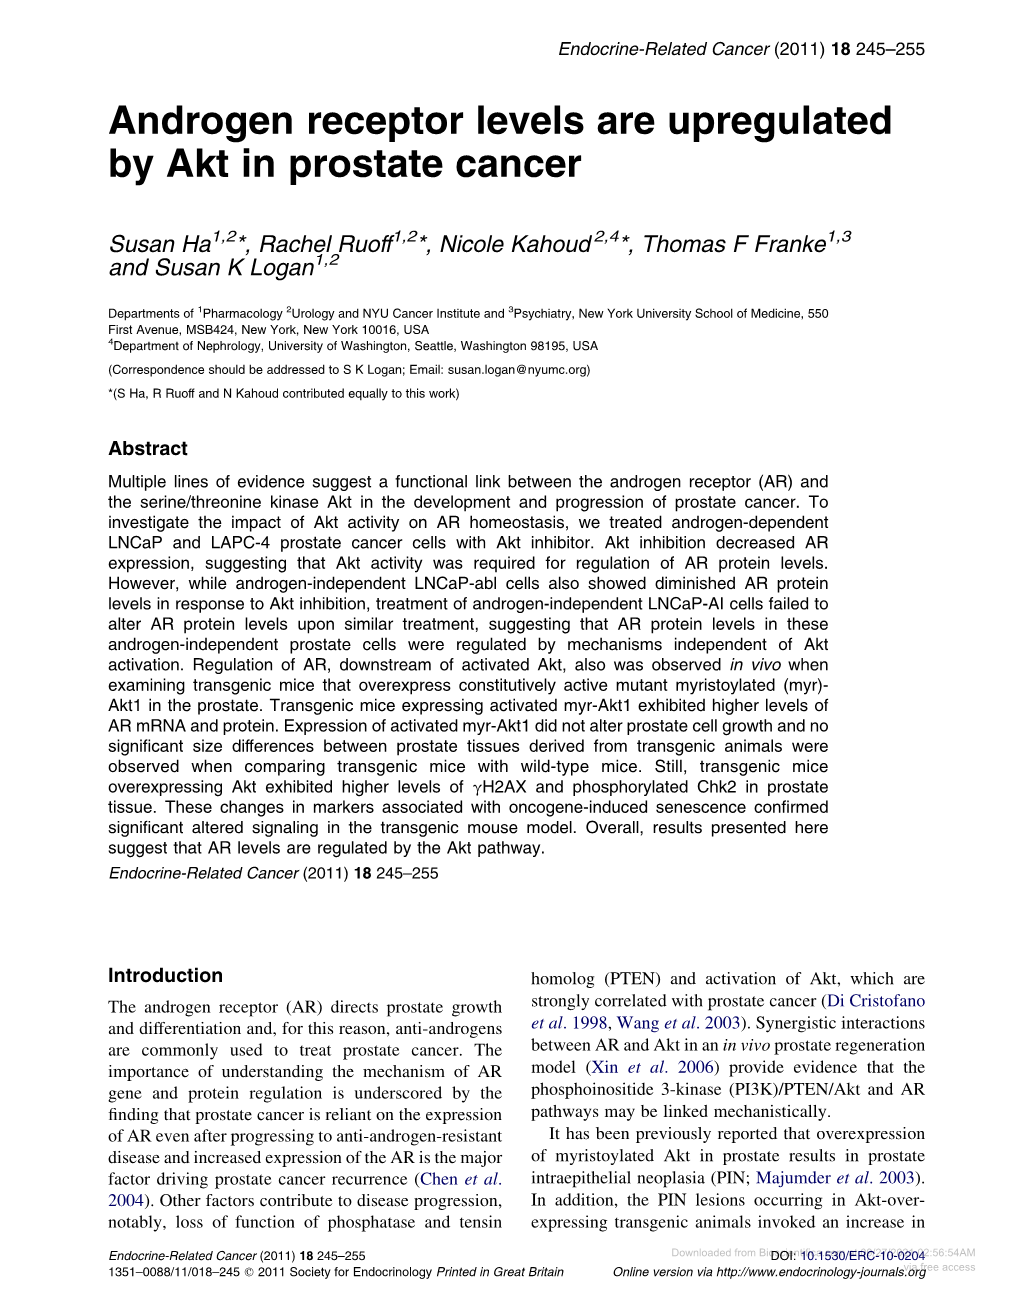 Androgen Receptor Levels Are Upregulated by Akt in Prostate Cancer